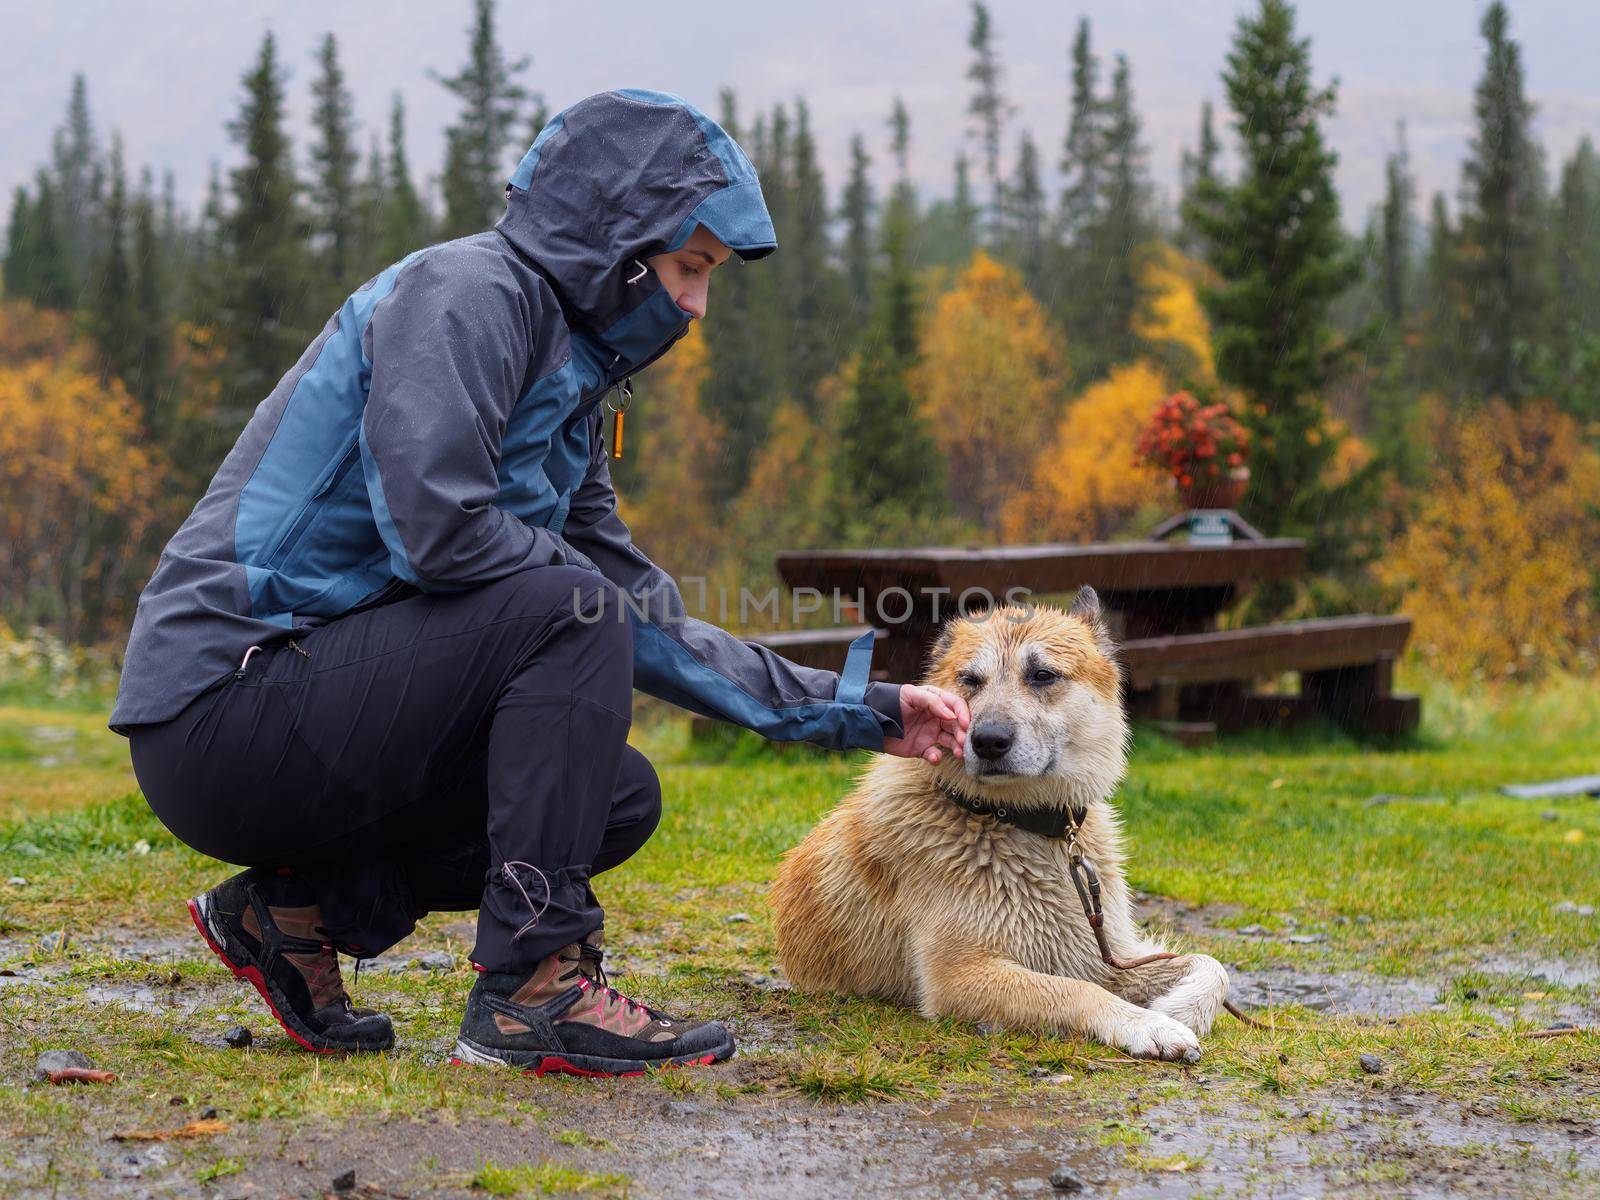 Woman petting a dog in the rain on the grass by Andre1ns